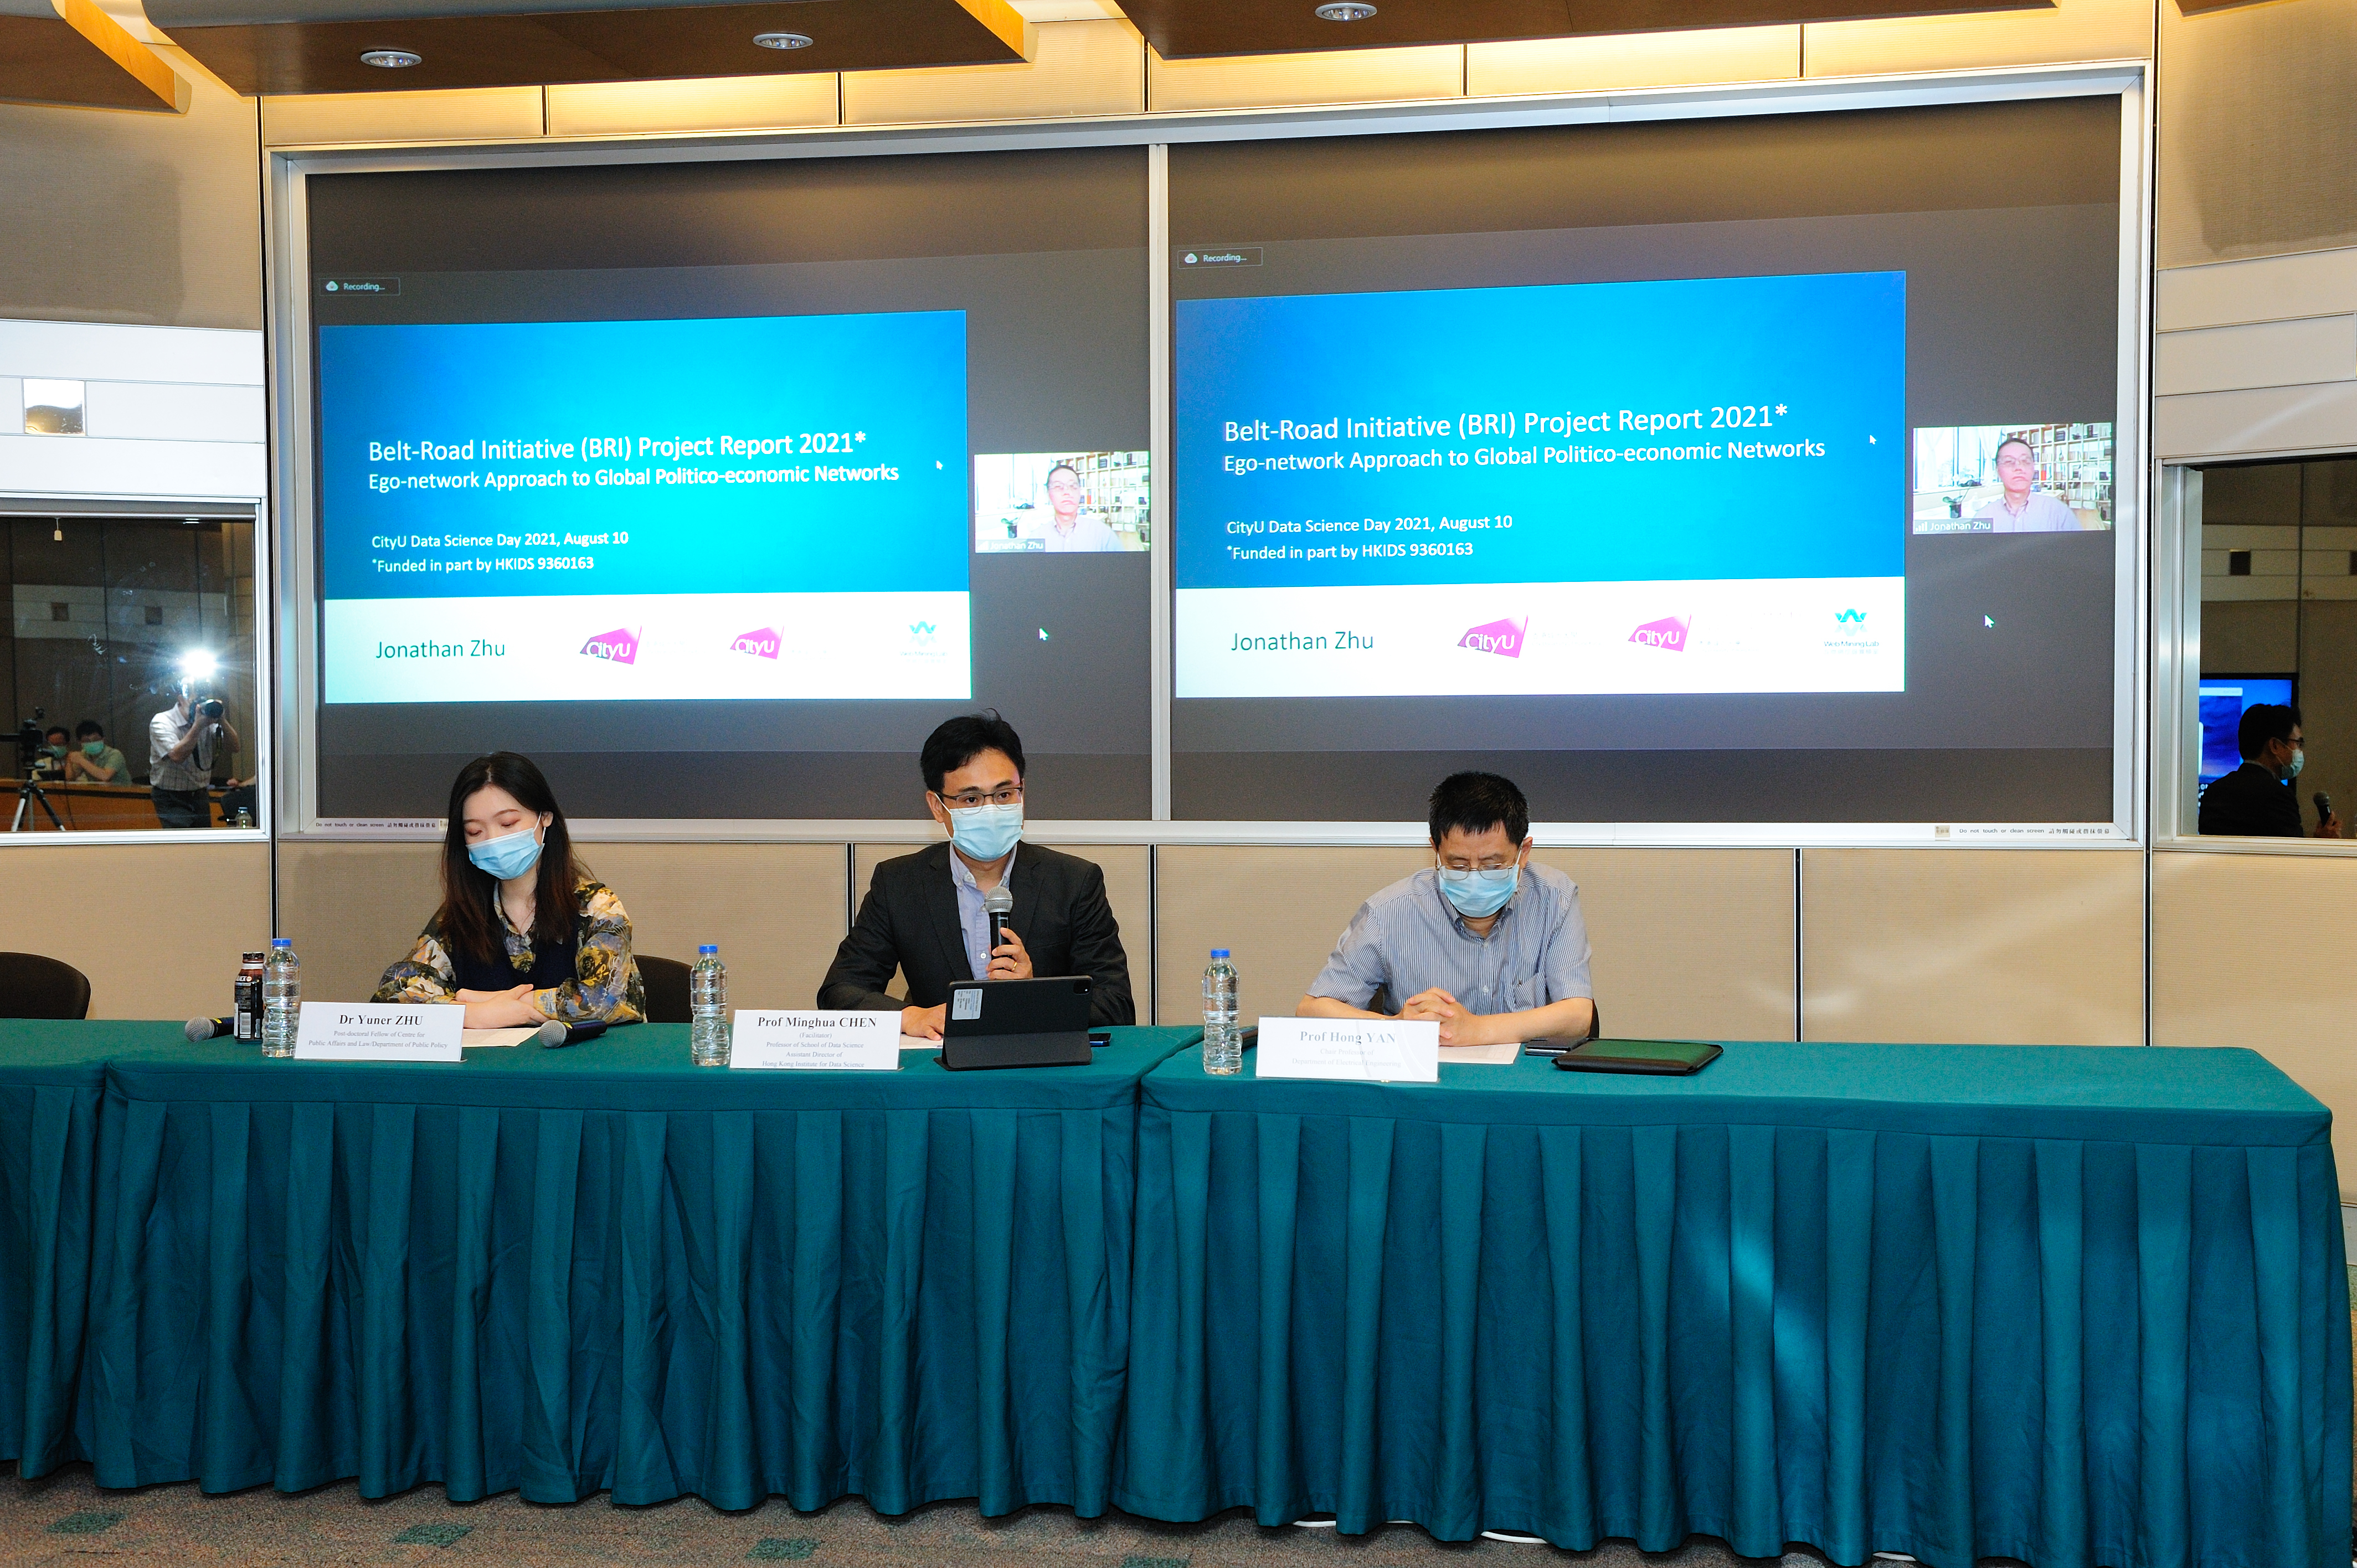 Technical presentations to showcase HKIDS’s cutting-edge research capabilities were chaired by Professor Dingxuan ZHOU and co-chair Professor Minghua CHEN